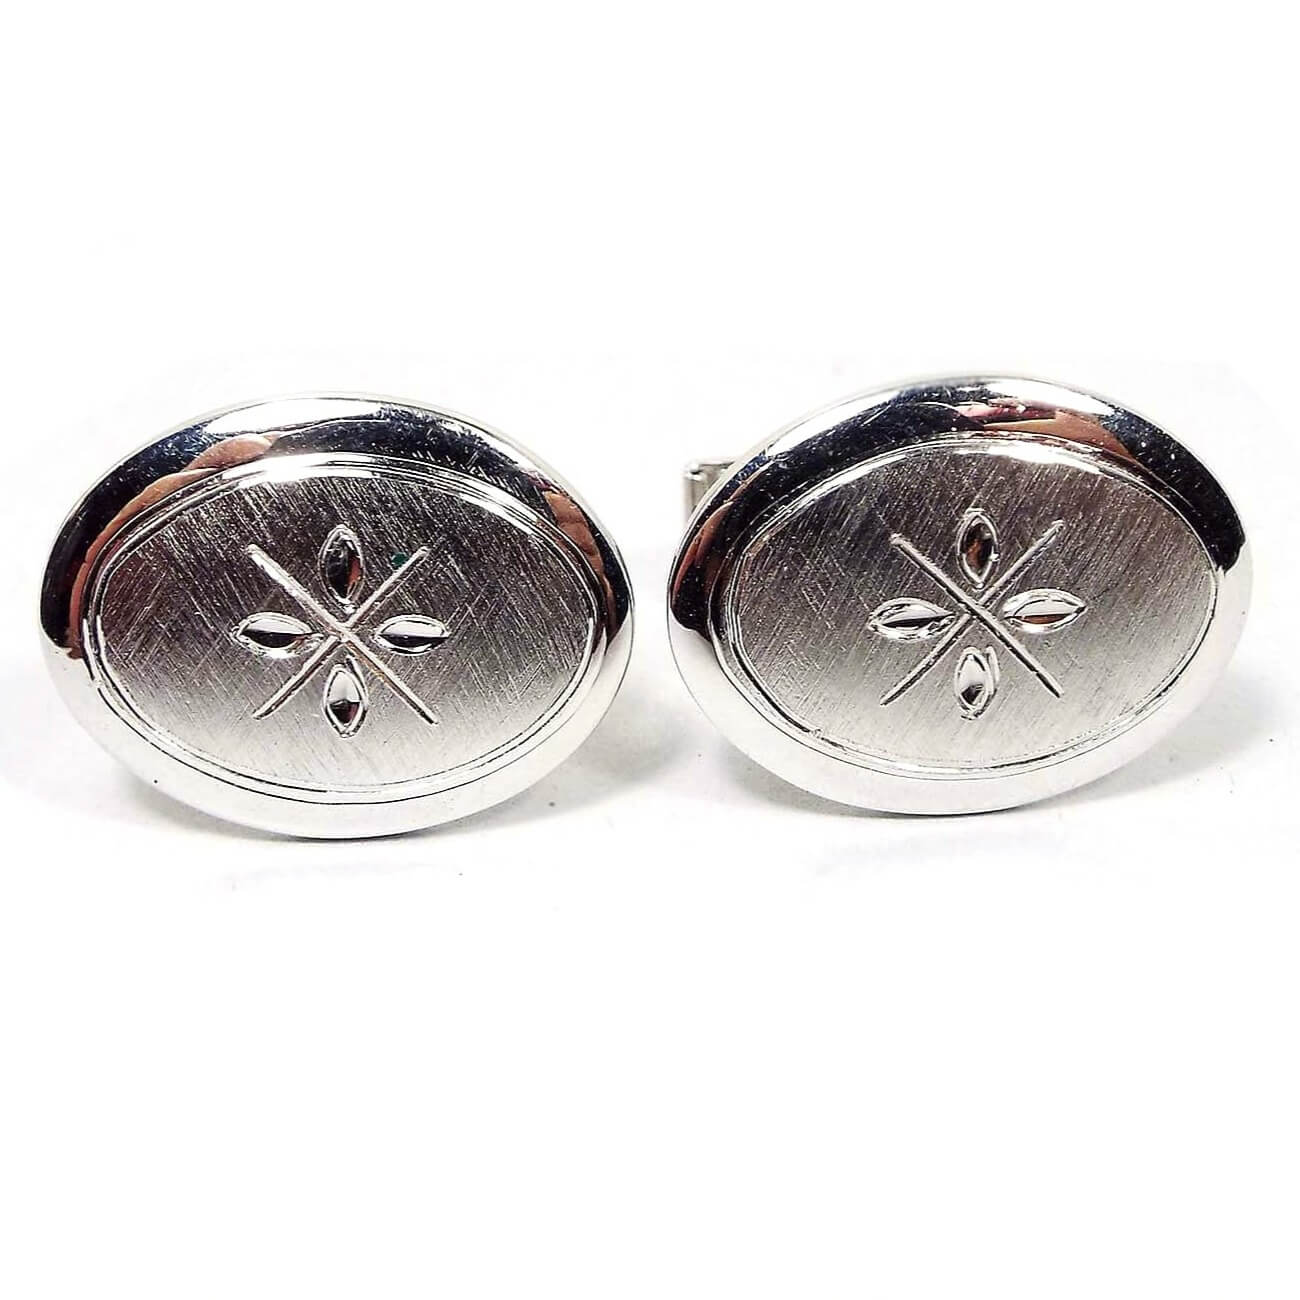 Front view of the Mid Century vintage sterling silver cufflinks. they are oval with matte brushed fronts and an etched design in the middle that looks like an X with marquis shapes in between each set of lines.